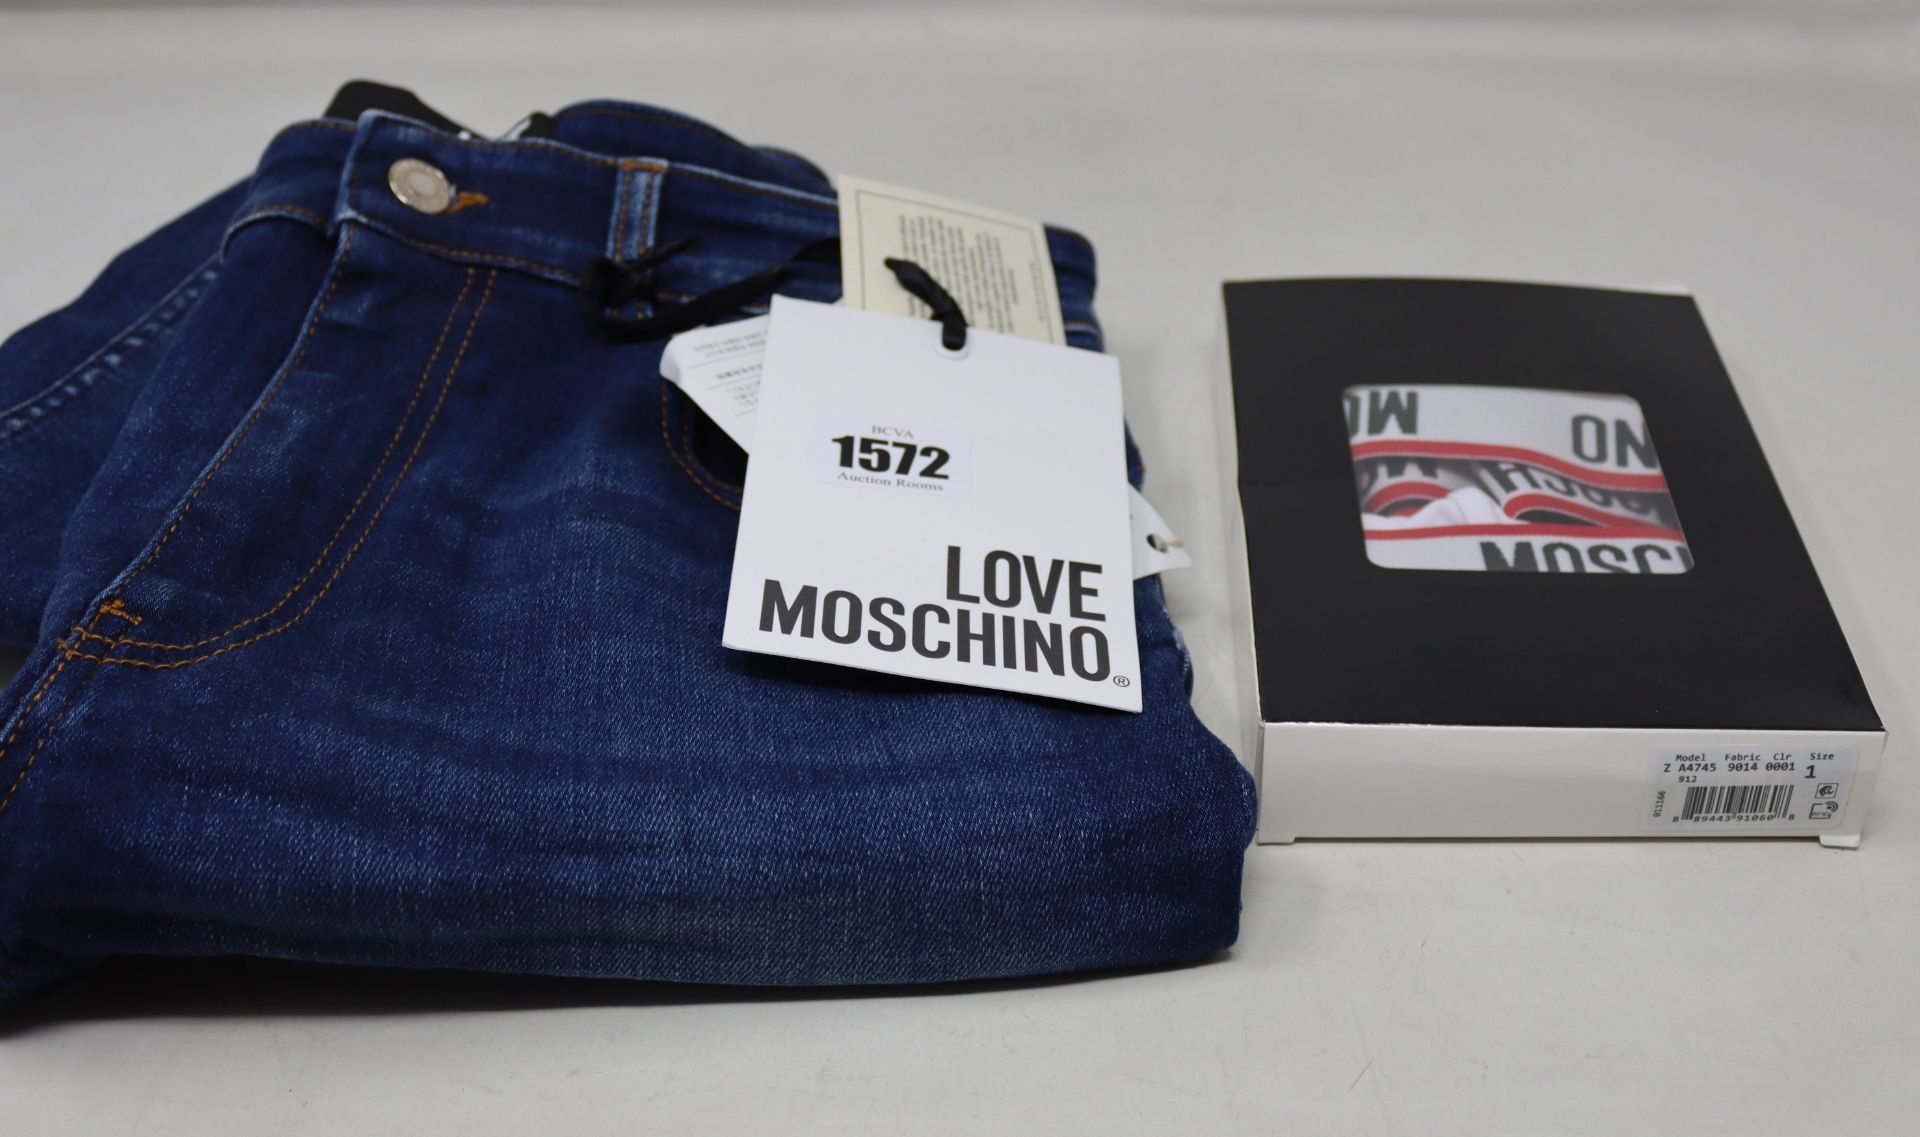 A pair of as Love Moschino jeans (Size 31) and a twin pack of Moschino briefs (Size 1).